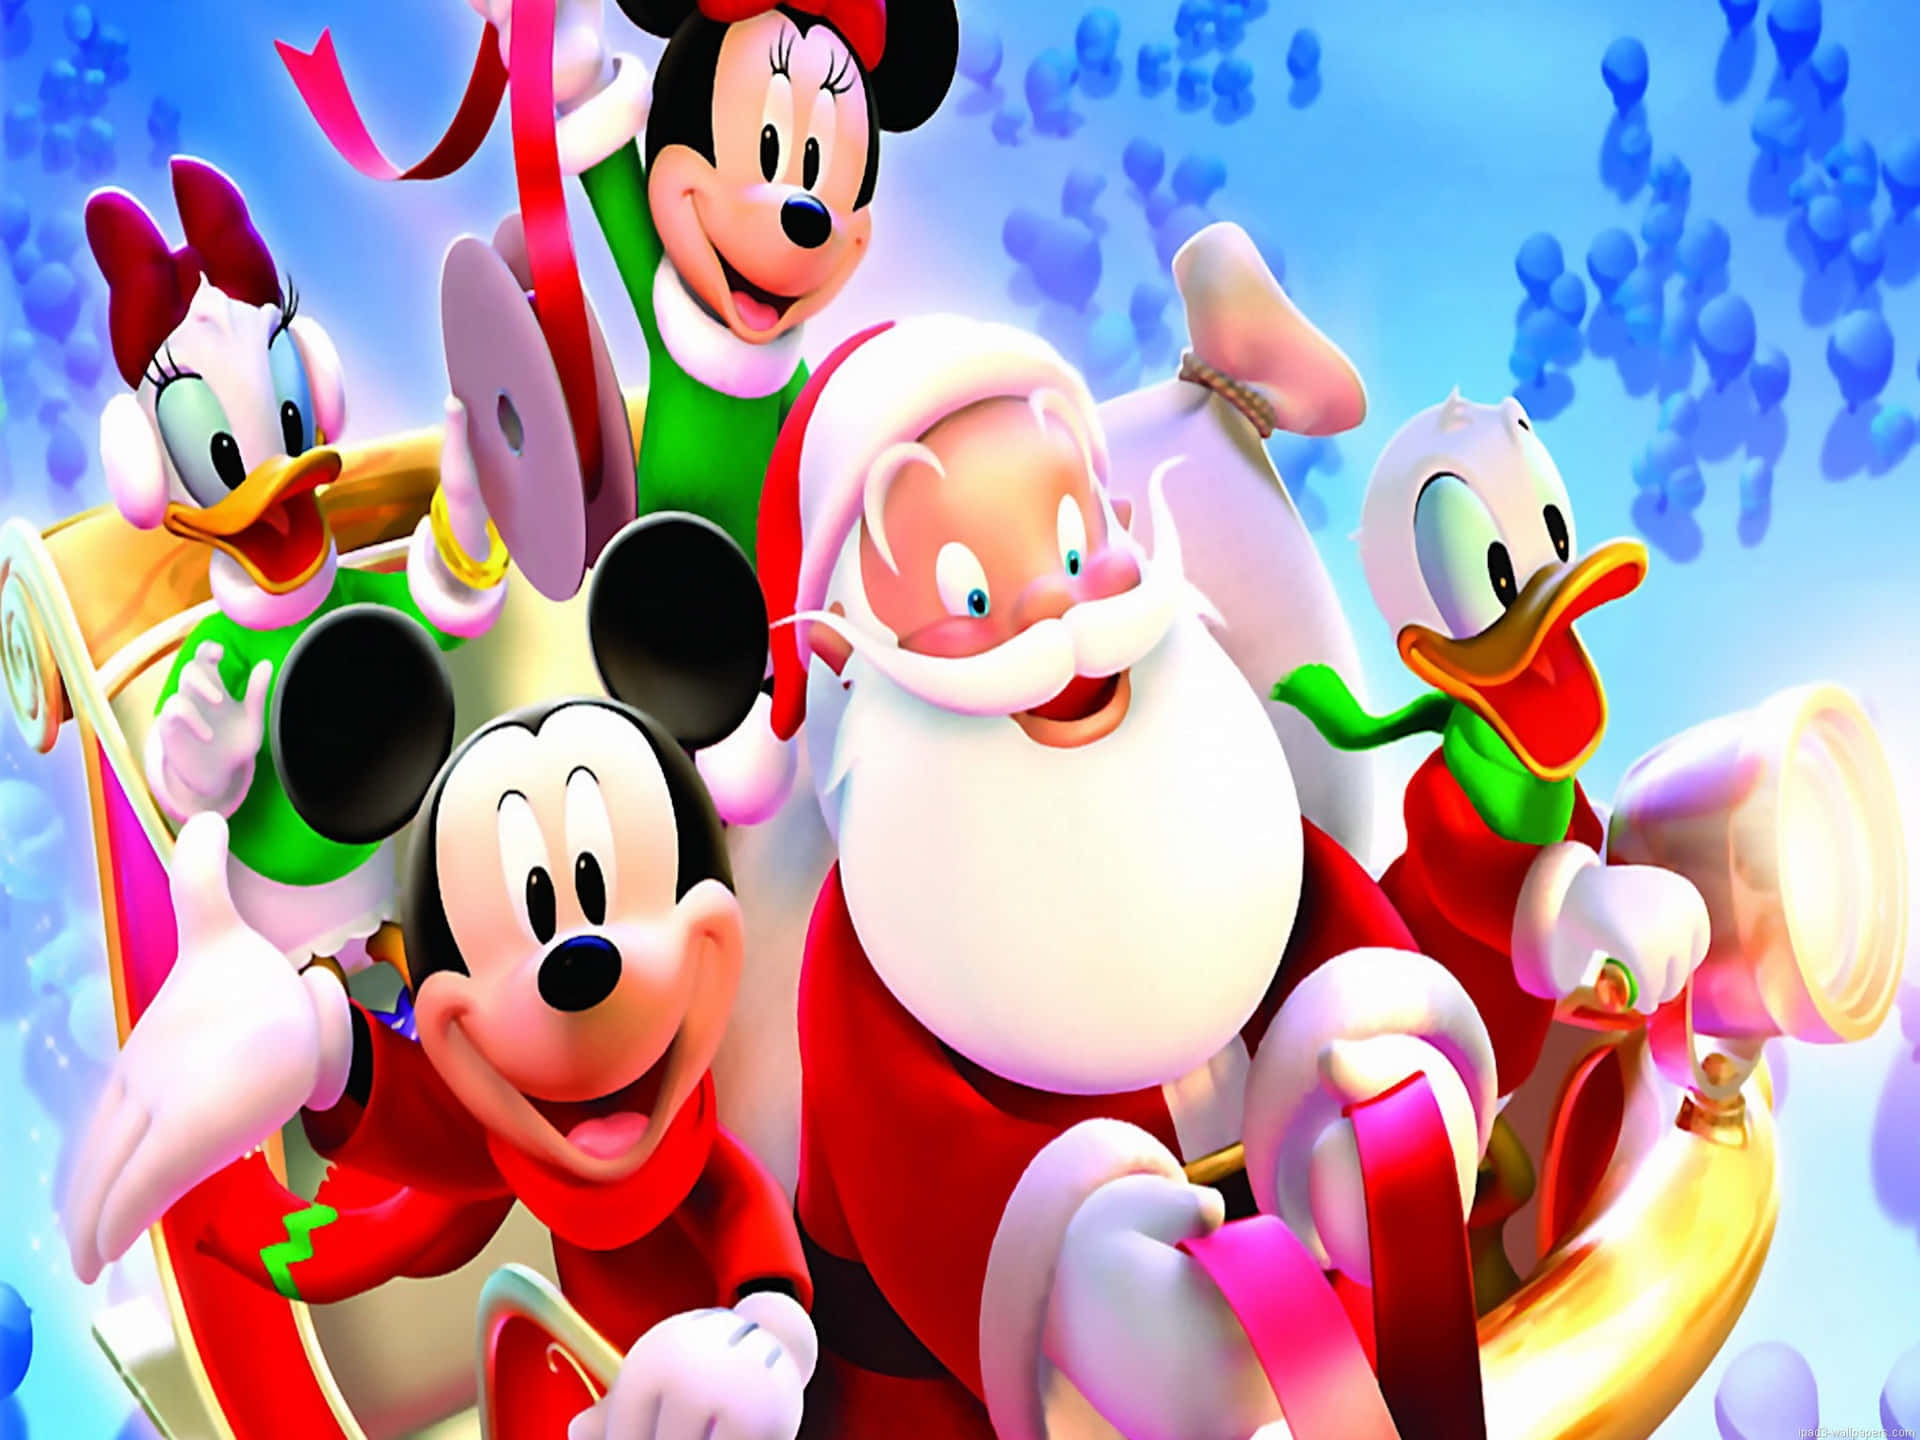 Get your Disney Spirit On This Christmas With A Brand New iPad! Wallpaper